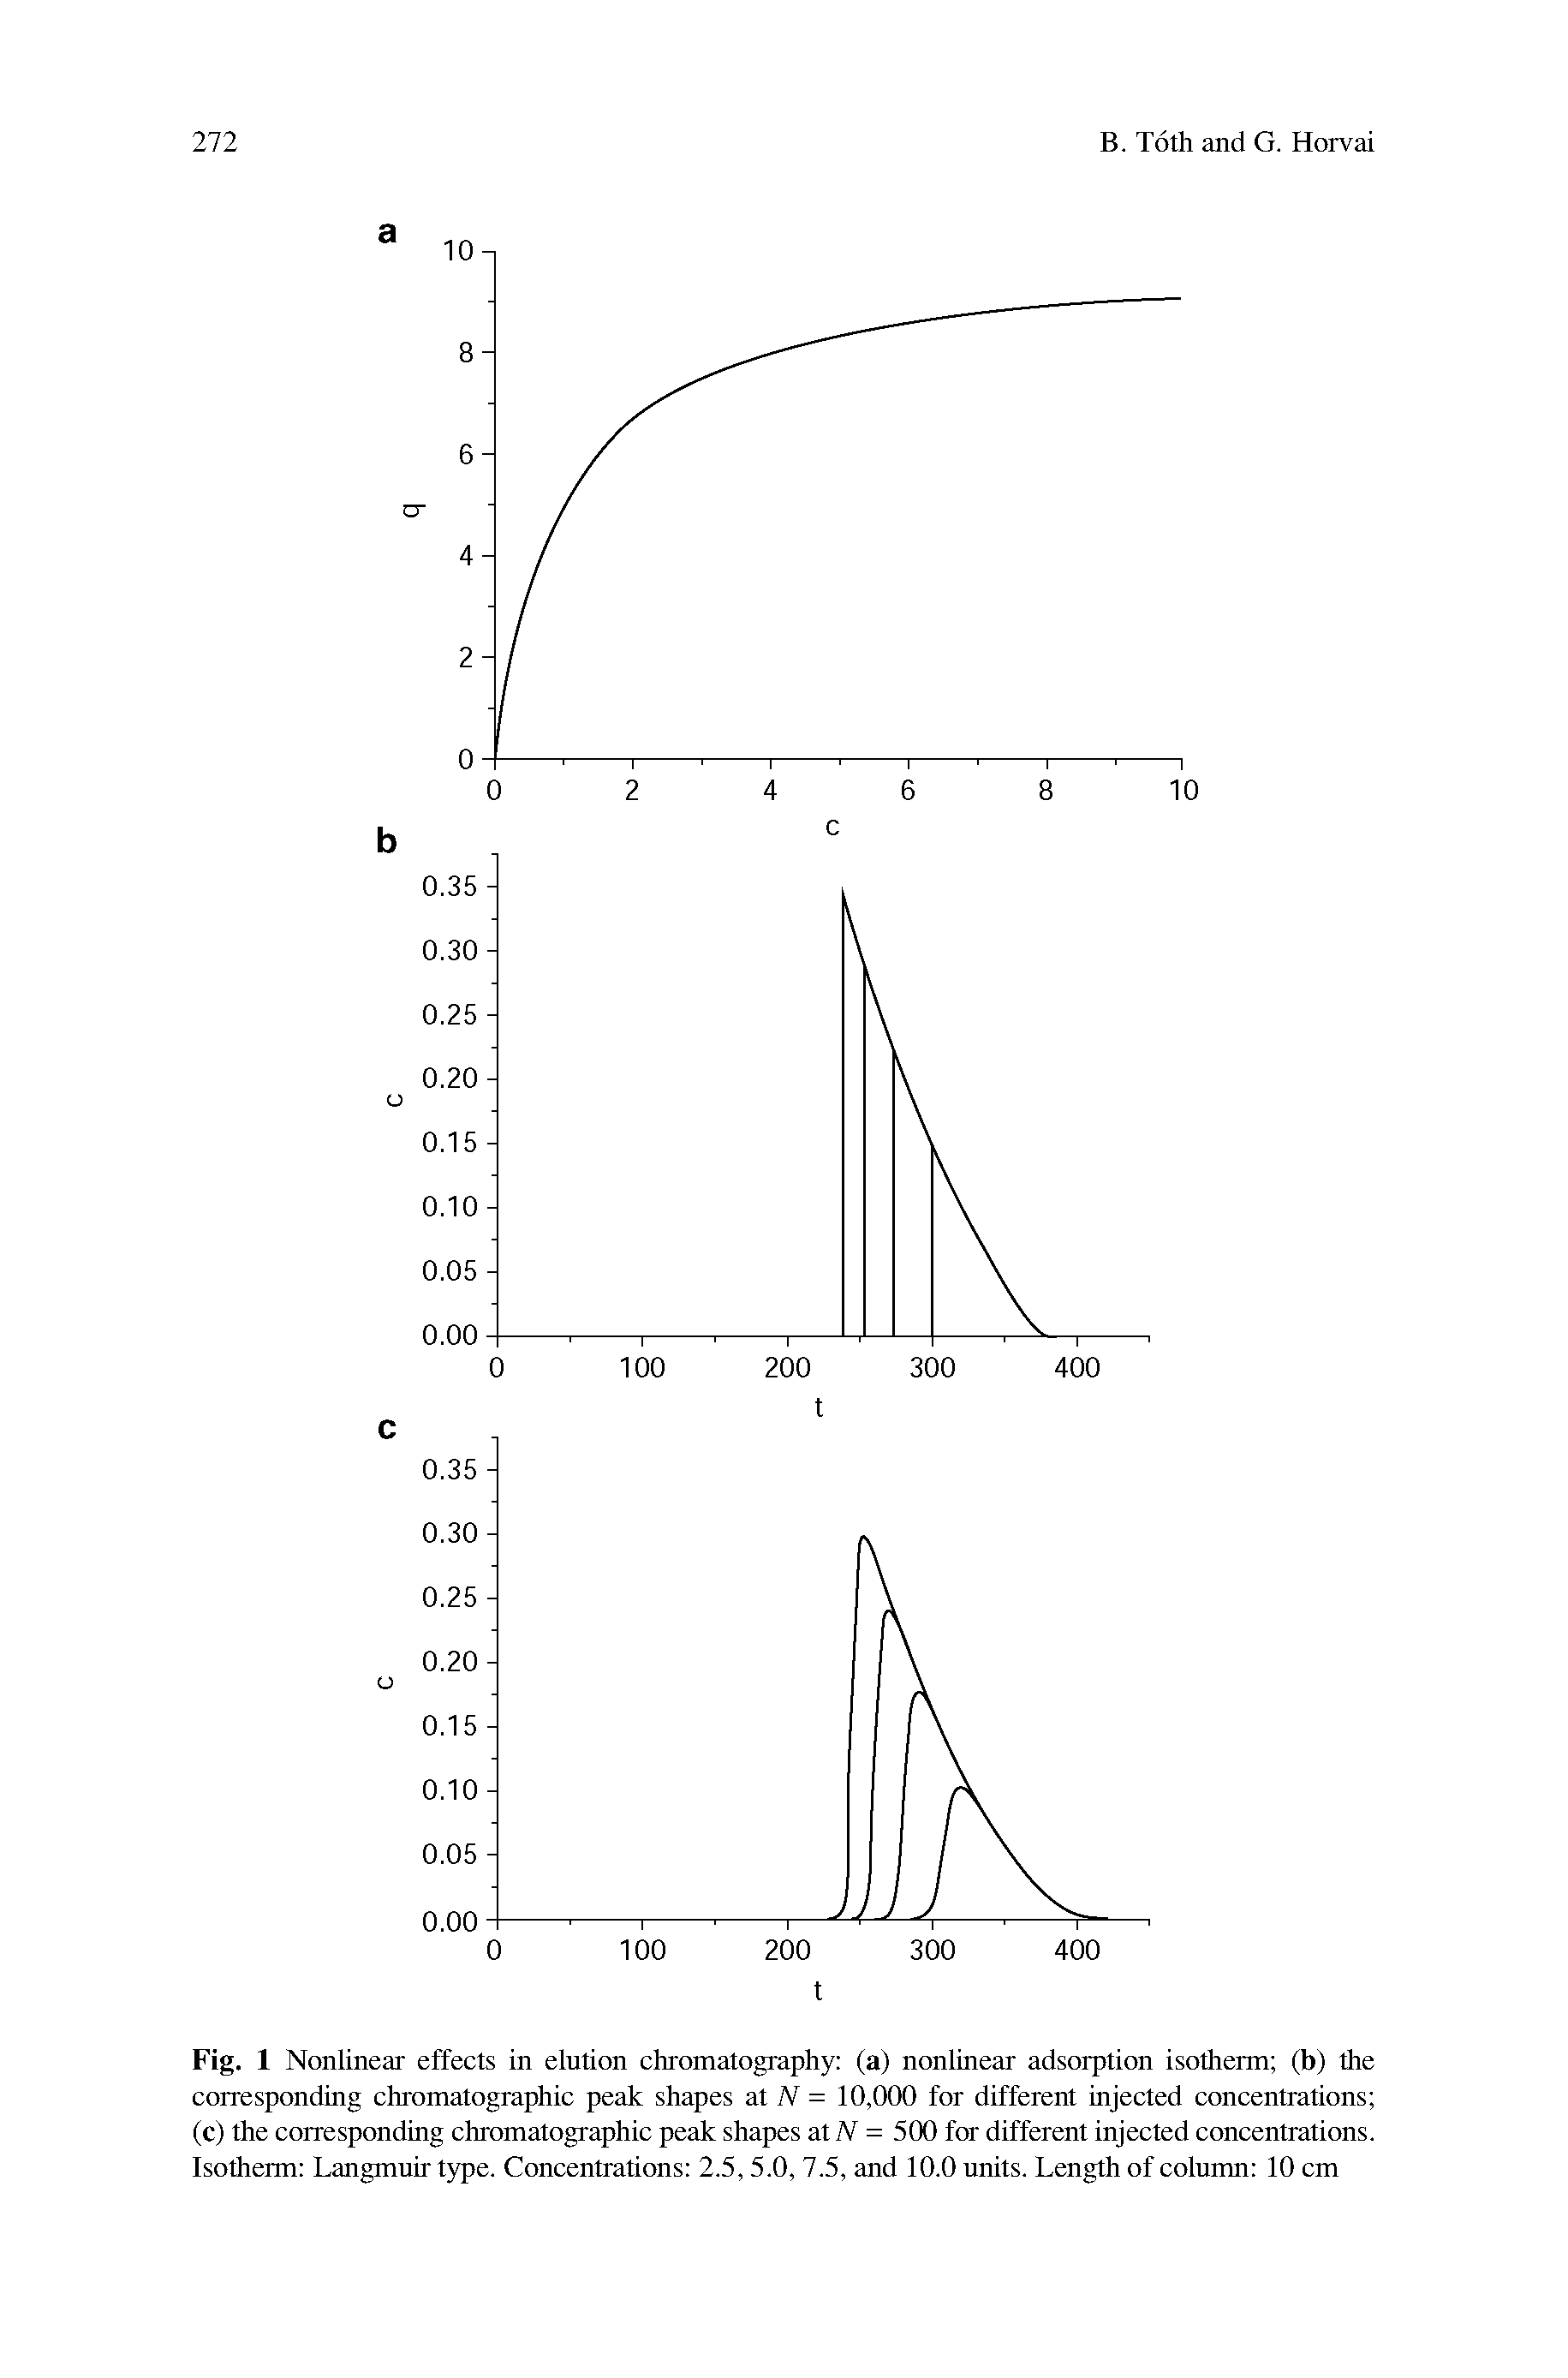 Fig. 1 Nonlinear effects in elution chromatography (a) nonlinear adsorption isotherm (b) the corresponding chromatographic peak shapes at N = 10,000 for different injected concentrations (c) the corresponding chromatographic peak shapes at N = 500 for different injected concentrations. Isotherm Langmuir type. Concentrations 2.5, 5.0, 7.5, and 10.0 units. Length of column 10 cm...